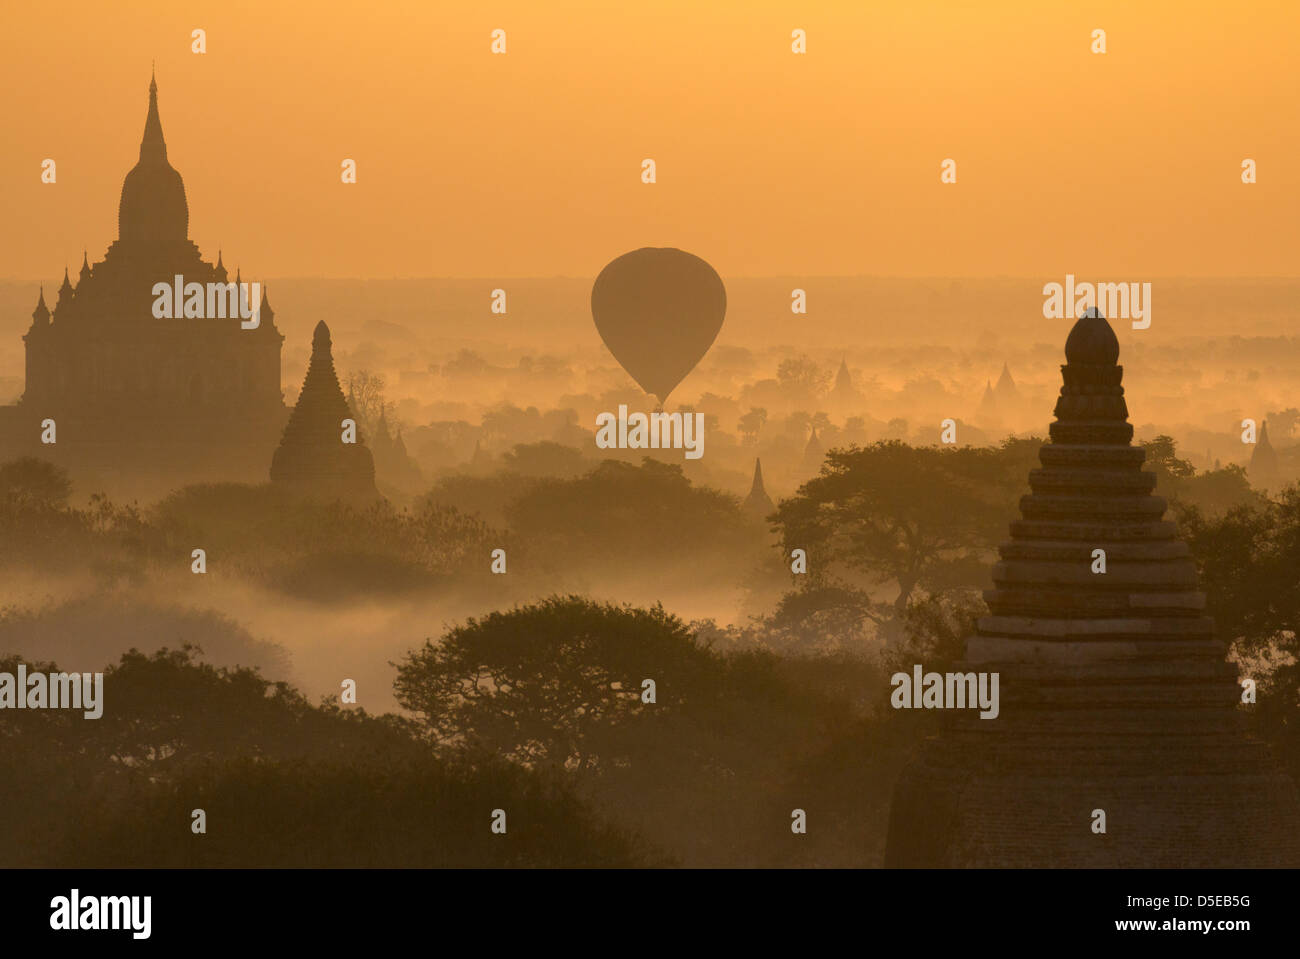 Sunrise with balloons over the pagodas of Bagan, Myanmar 7 Stock Photo